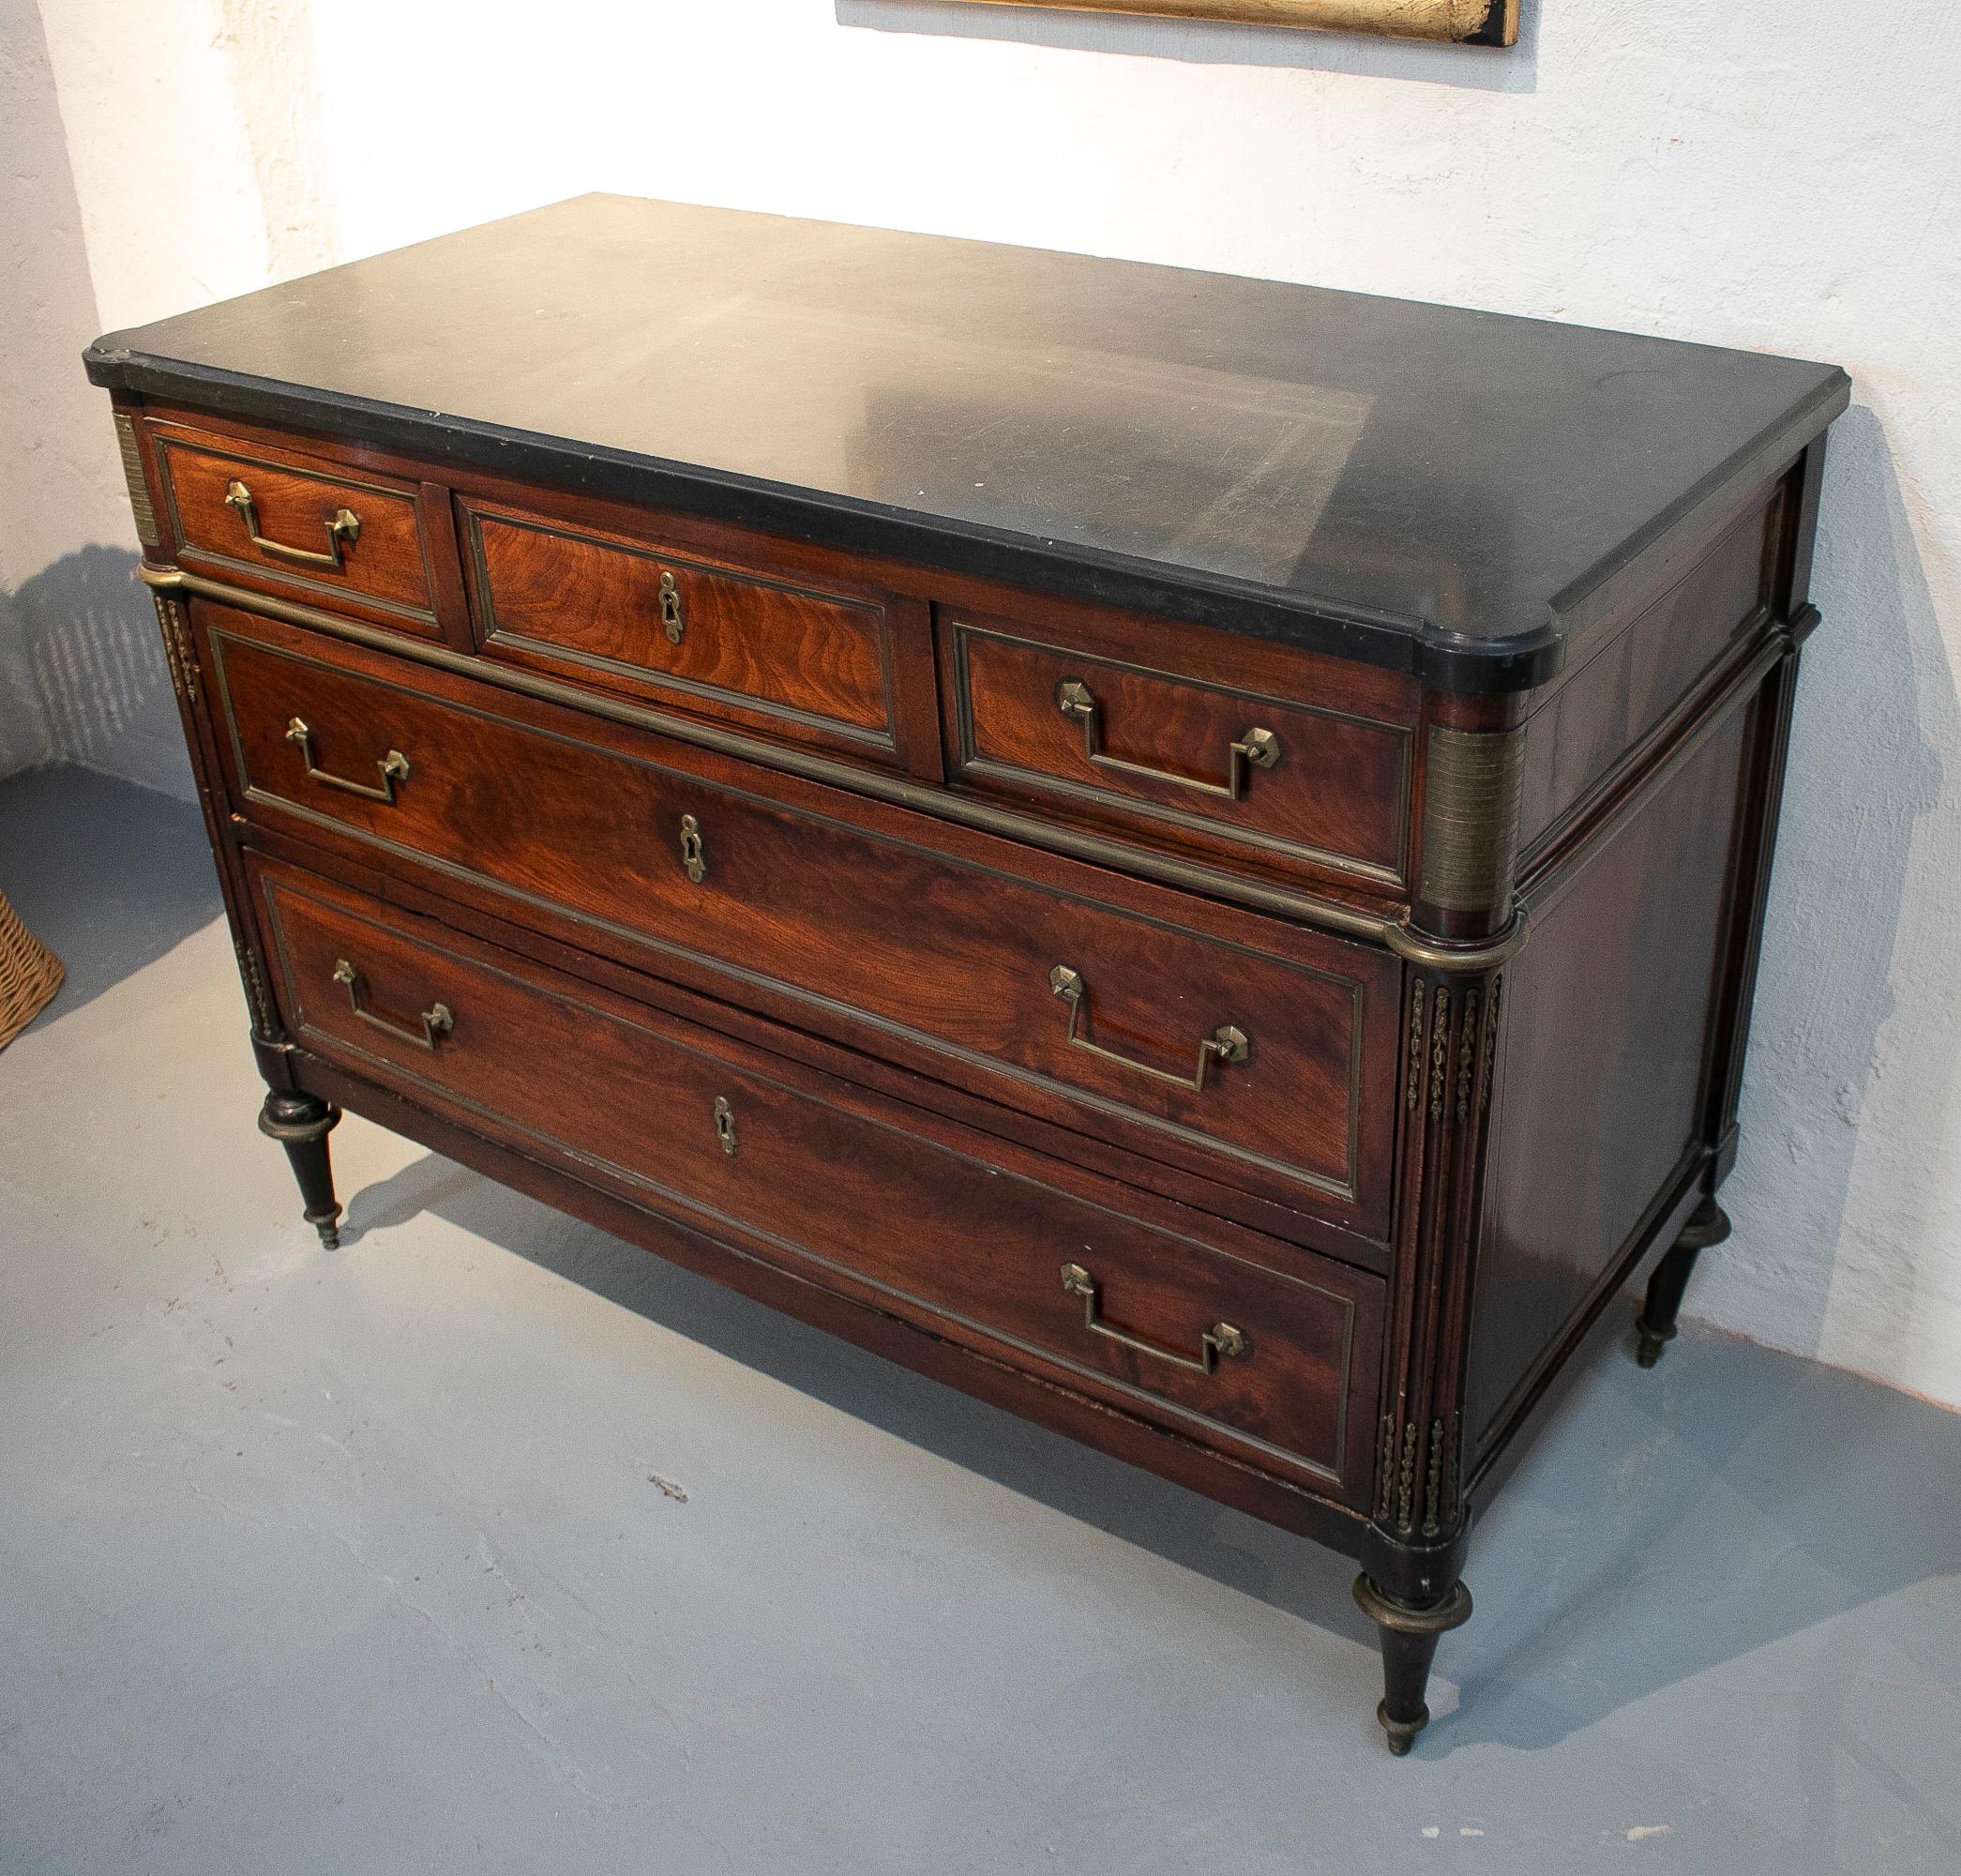 19th century French five-drawer chest with bronze decorations.